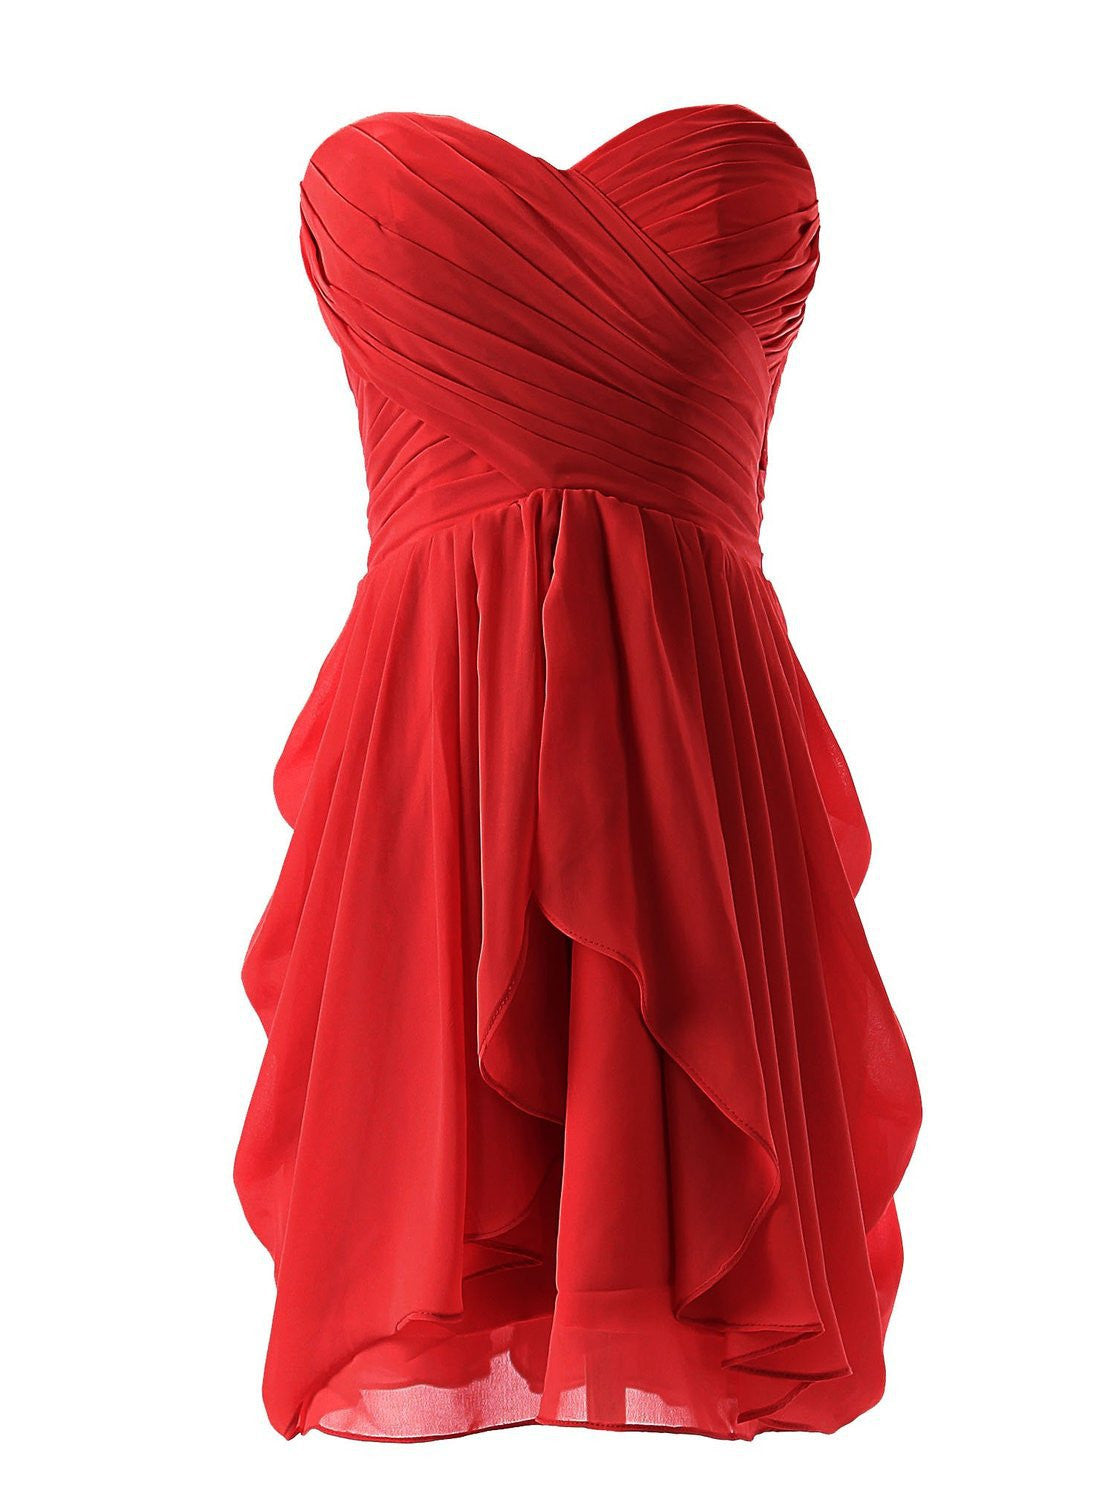 Sterpless Solid Color Irregular Ruffles Homecoming Party Dress - Meet Yours Fashion - 3